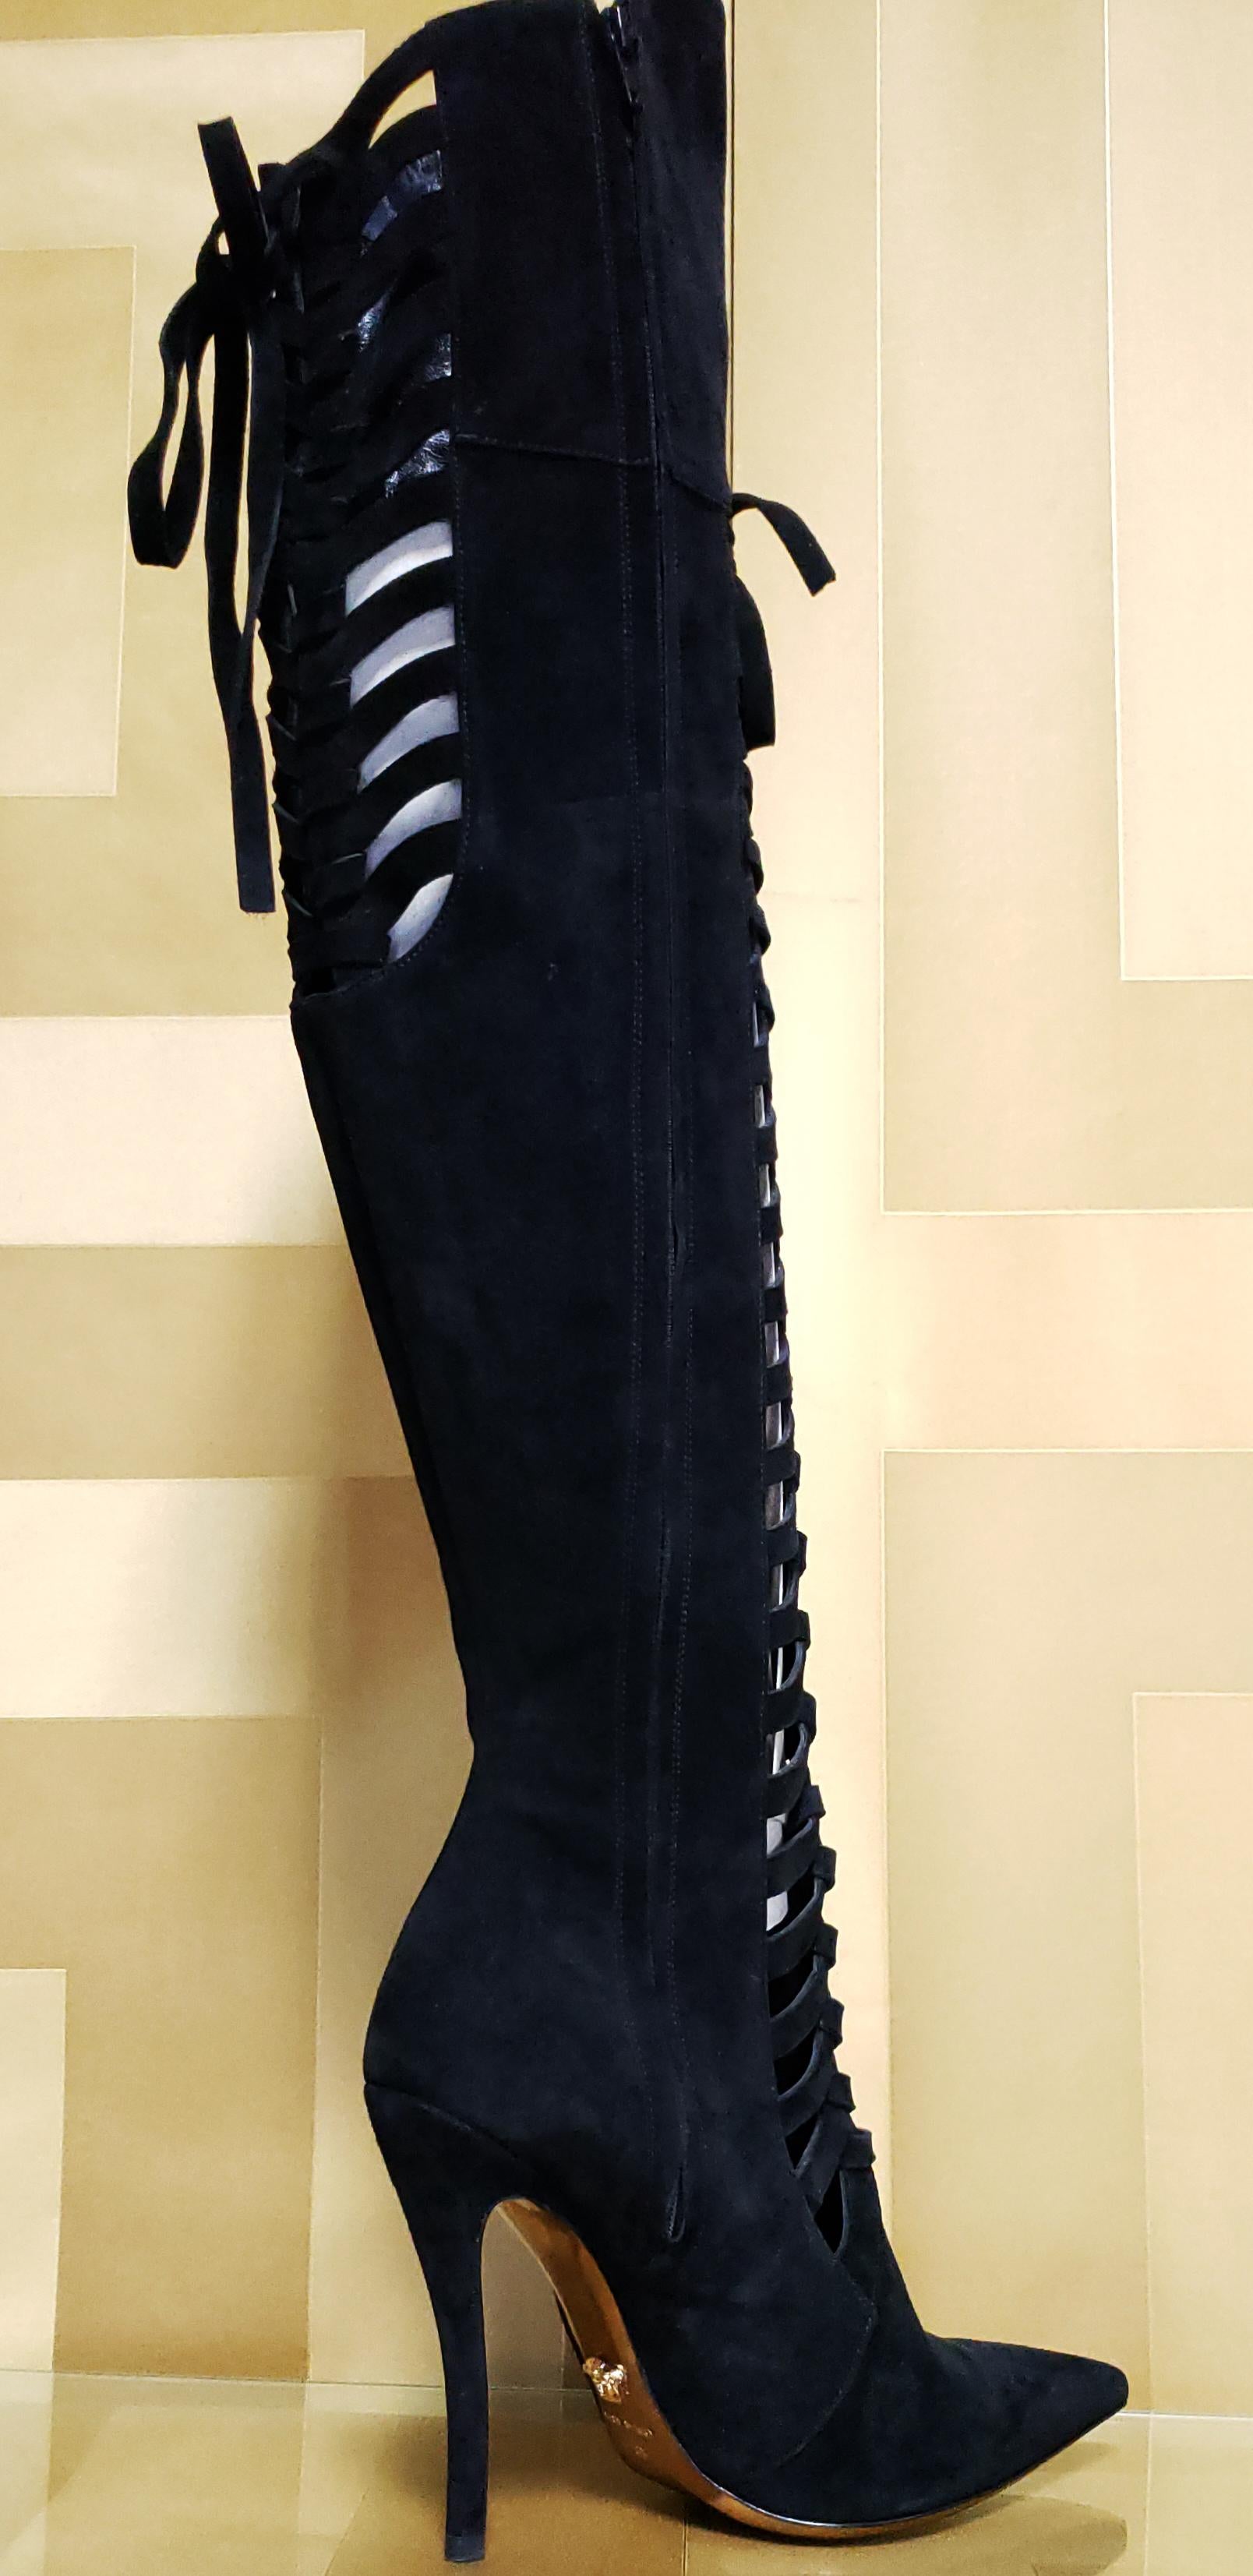 F/W 2014 Look # 27 NEW VERSACE BLACK SUEDE OVER THE KNEE BOOTS 38 - 8 For Sale 4